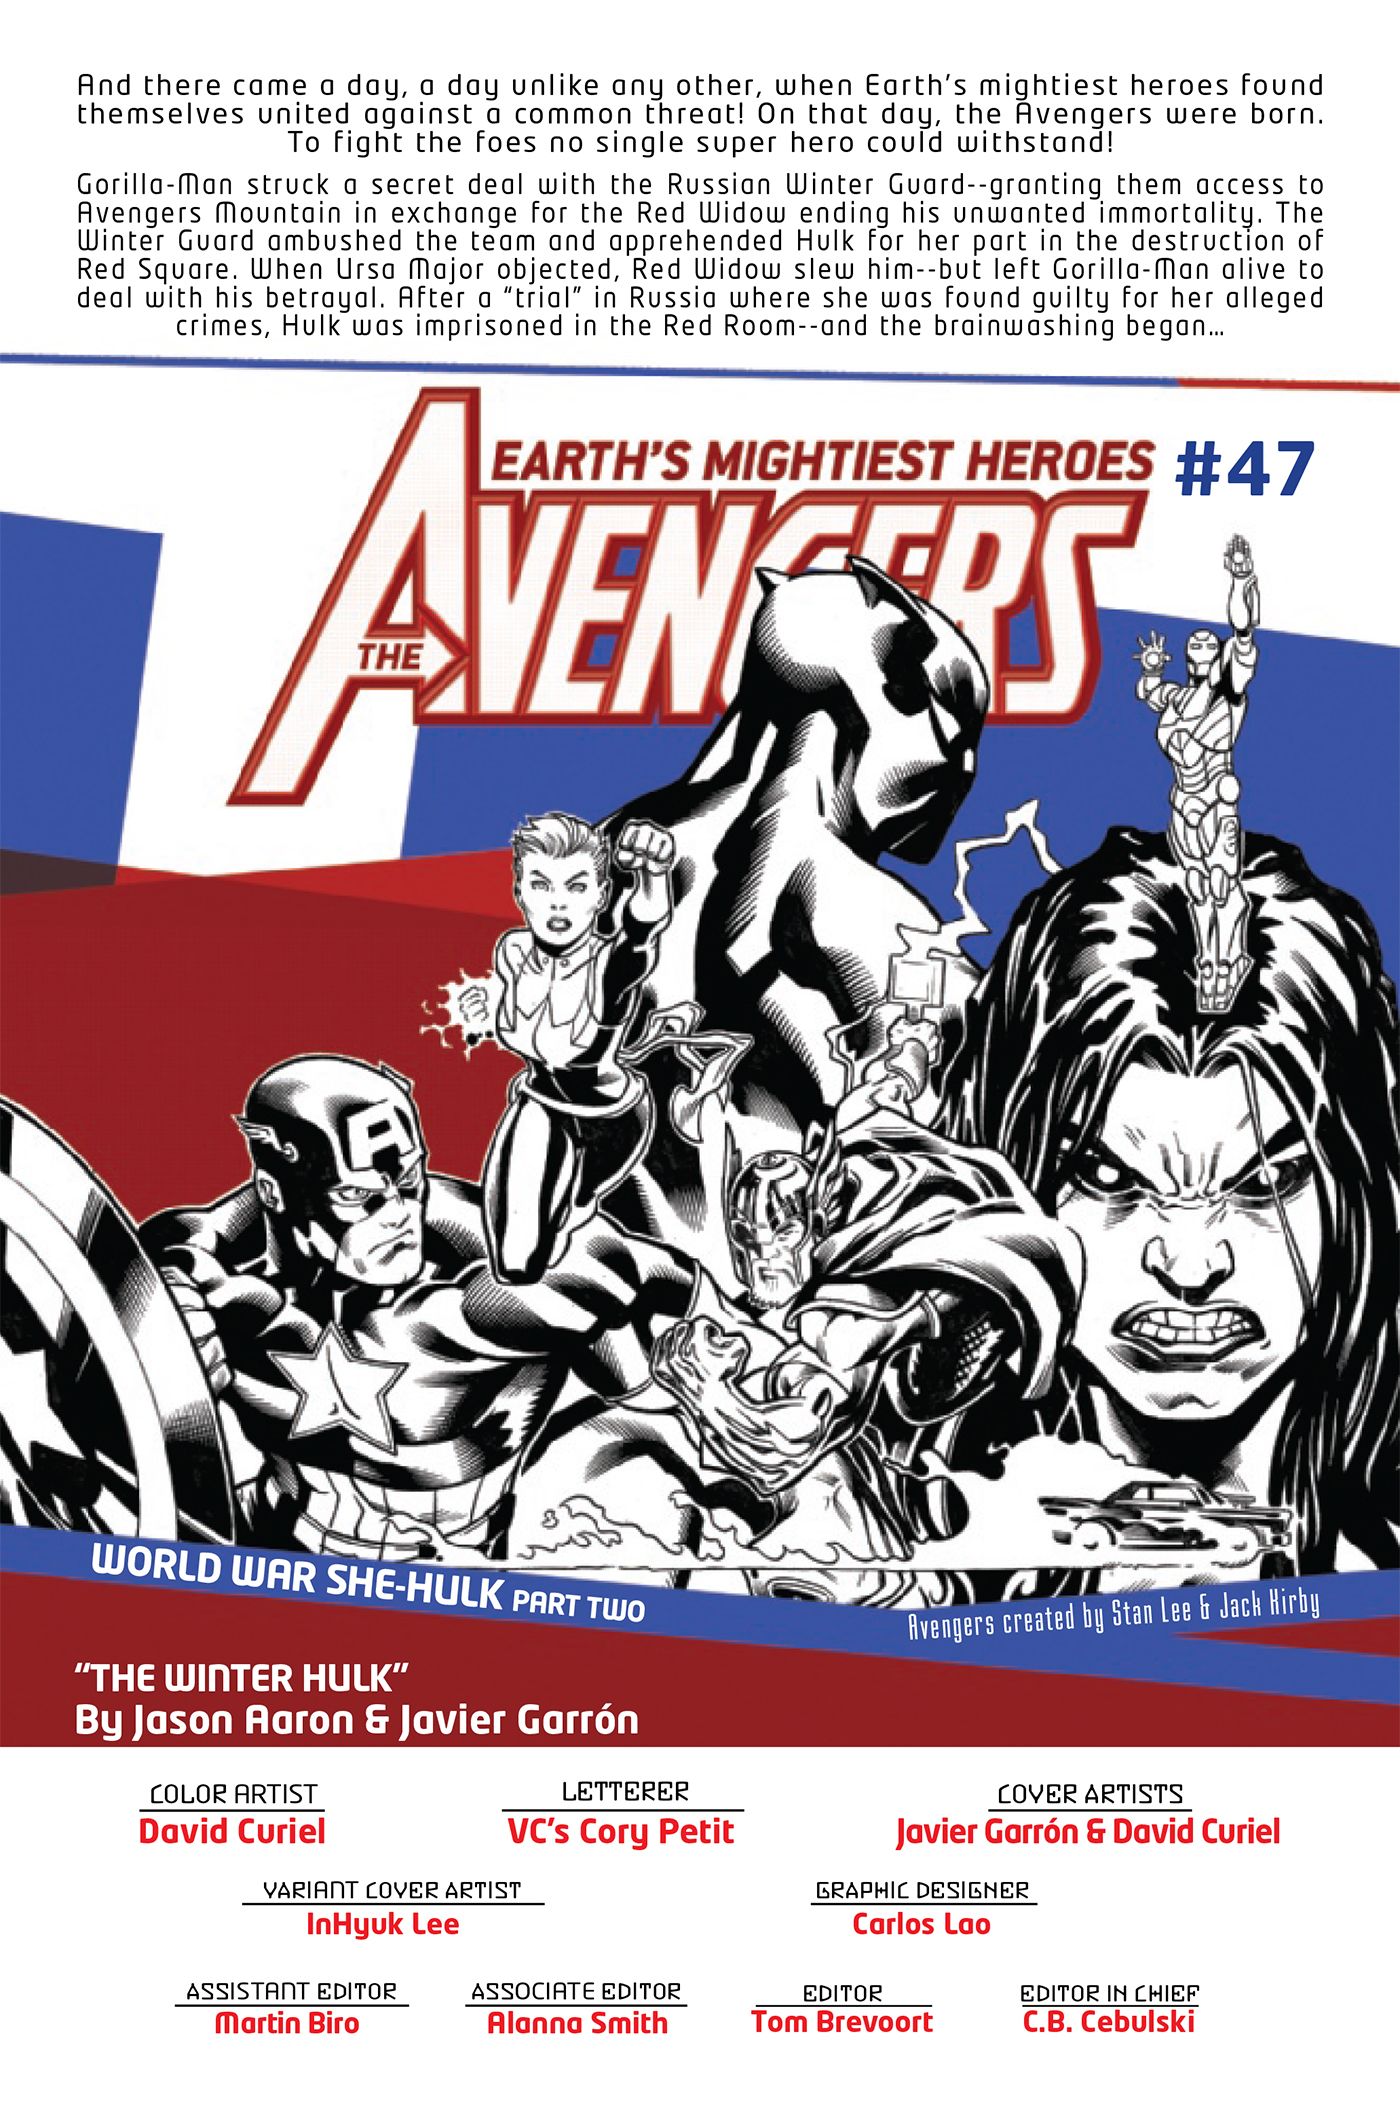 The recap for Avengers #47, the second part of the &quot;World War She-Hulk&quot; arc.